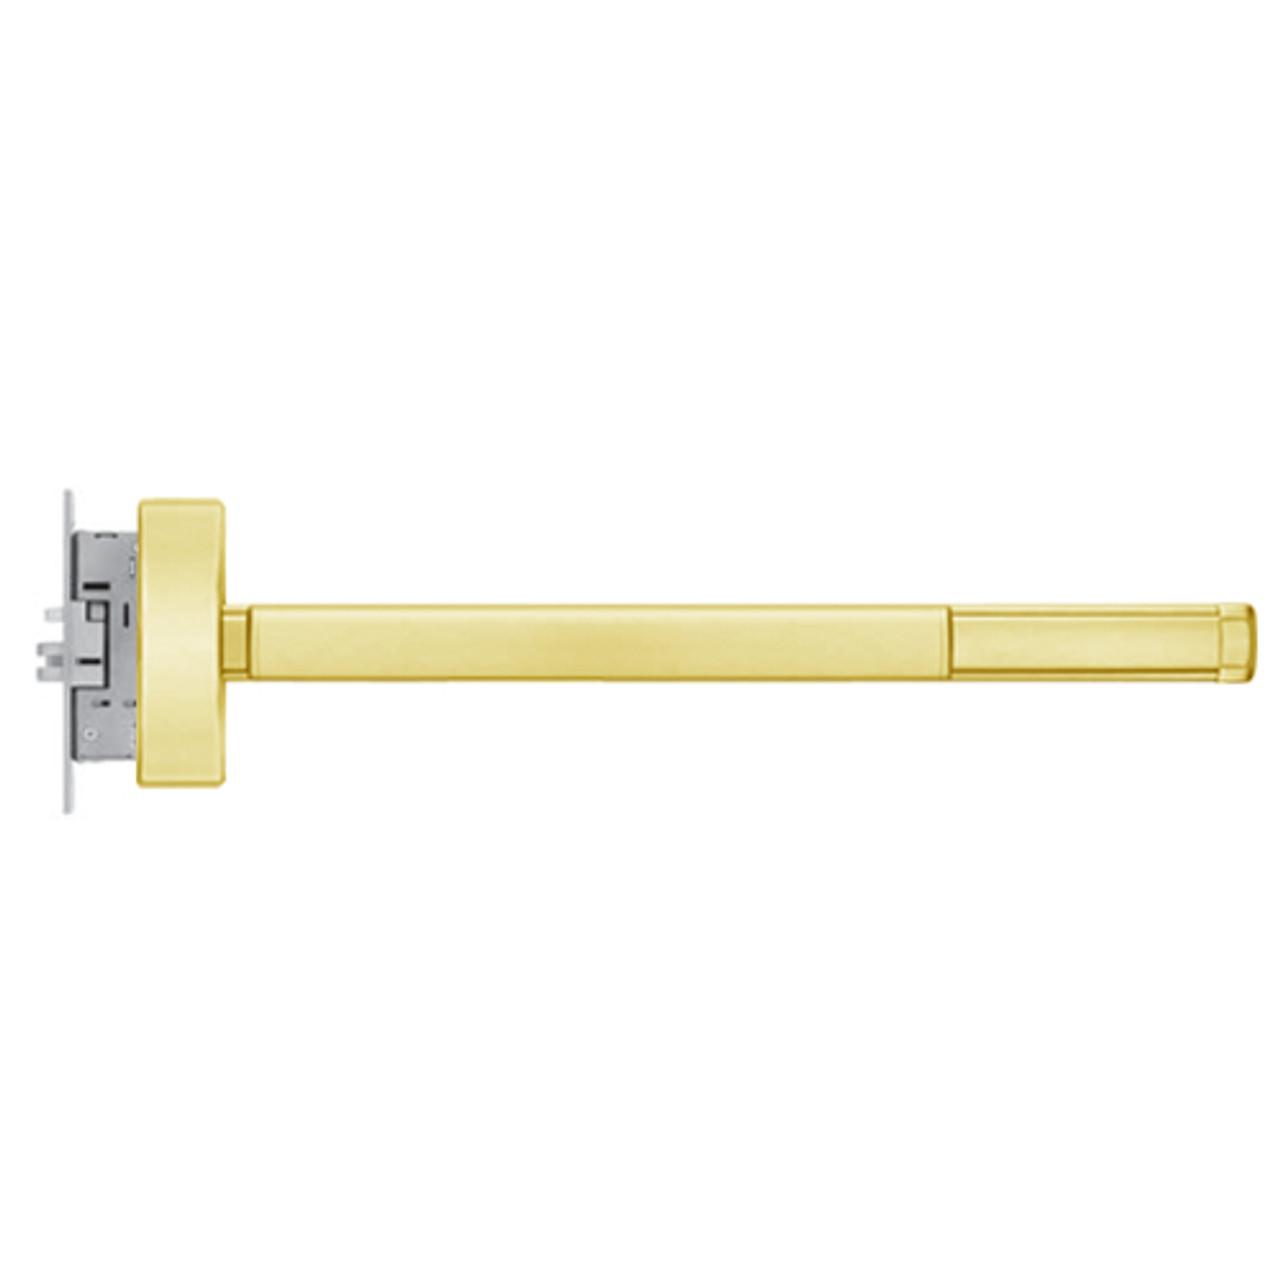 2303-LHR-605-36 PHI 2300 Series Non Fire Rated Apex Mortise Exit Device Prepped for Key Retracts Latchbolt in Bright Brass Finish